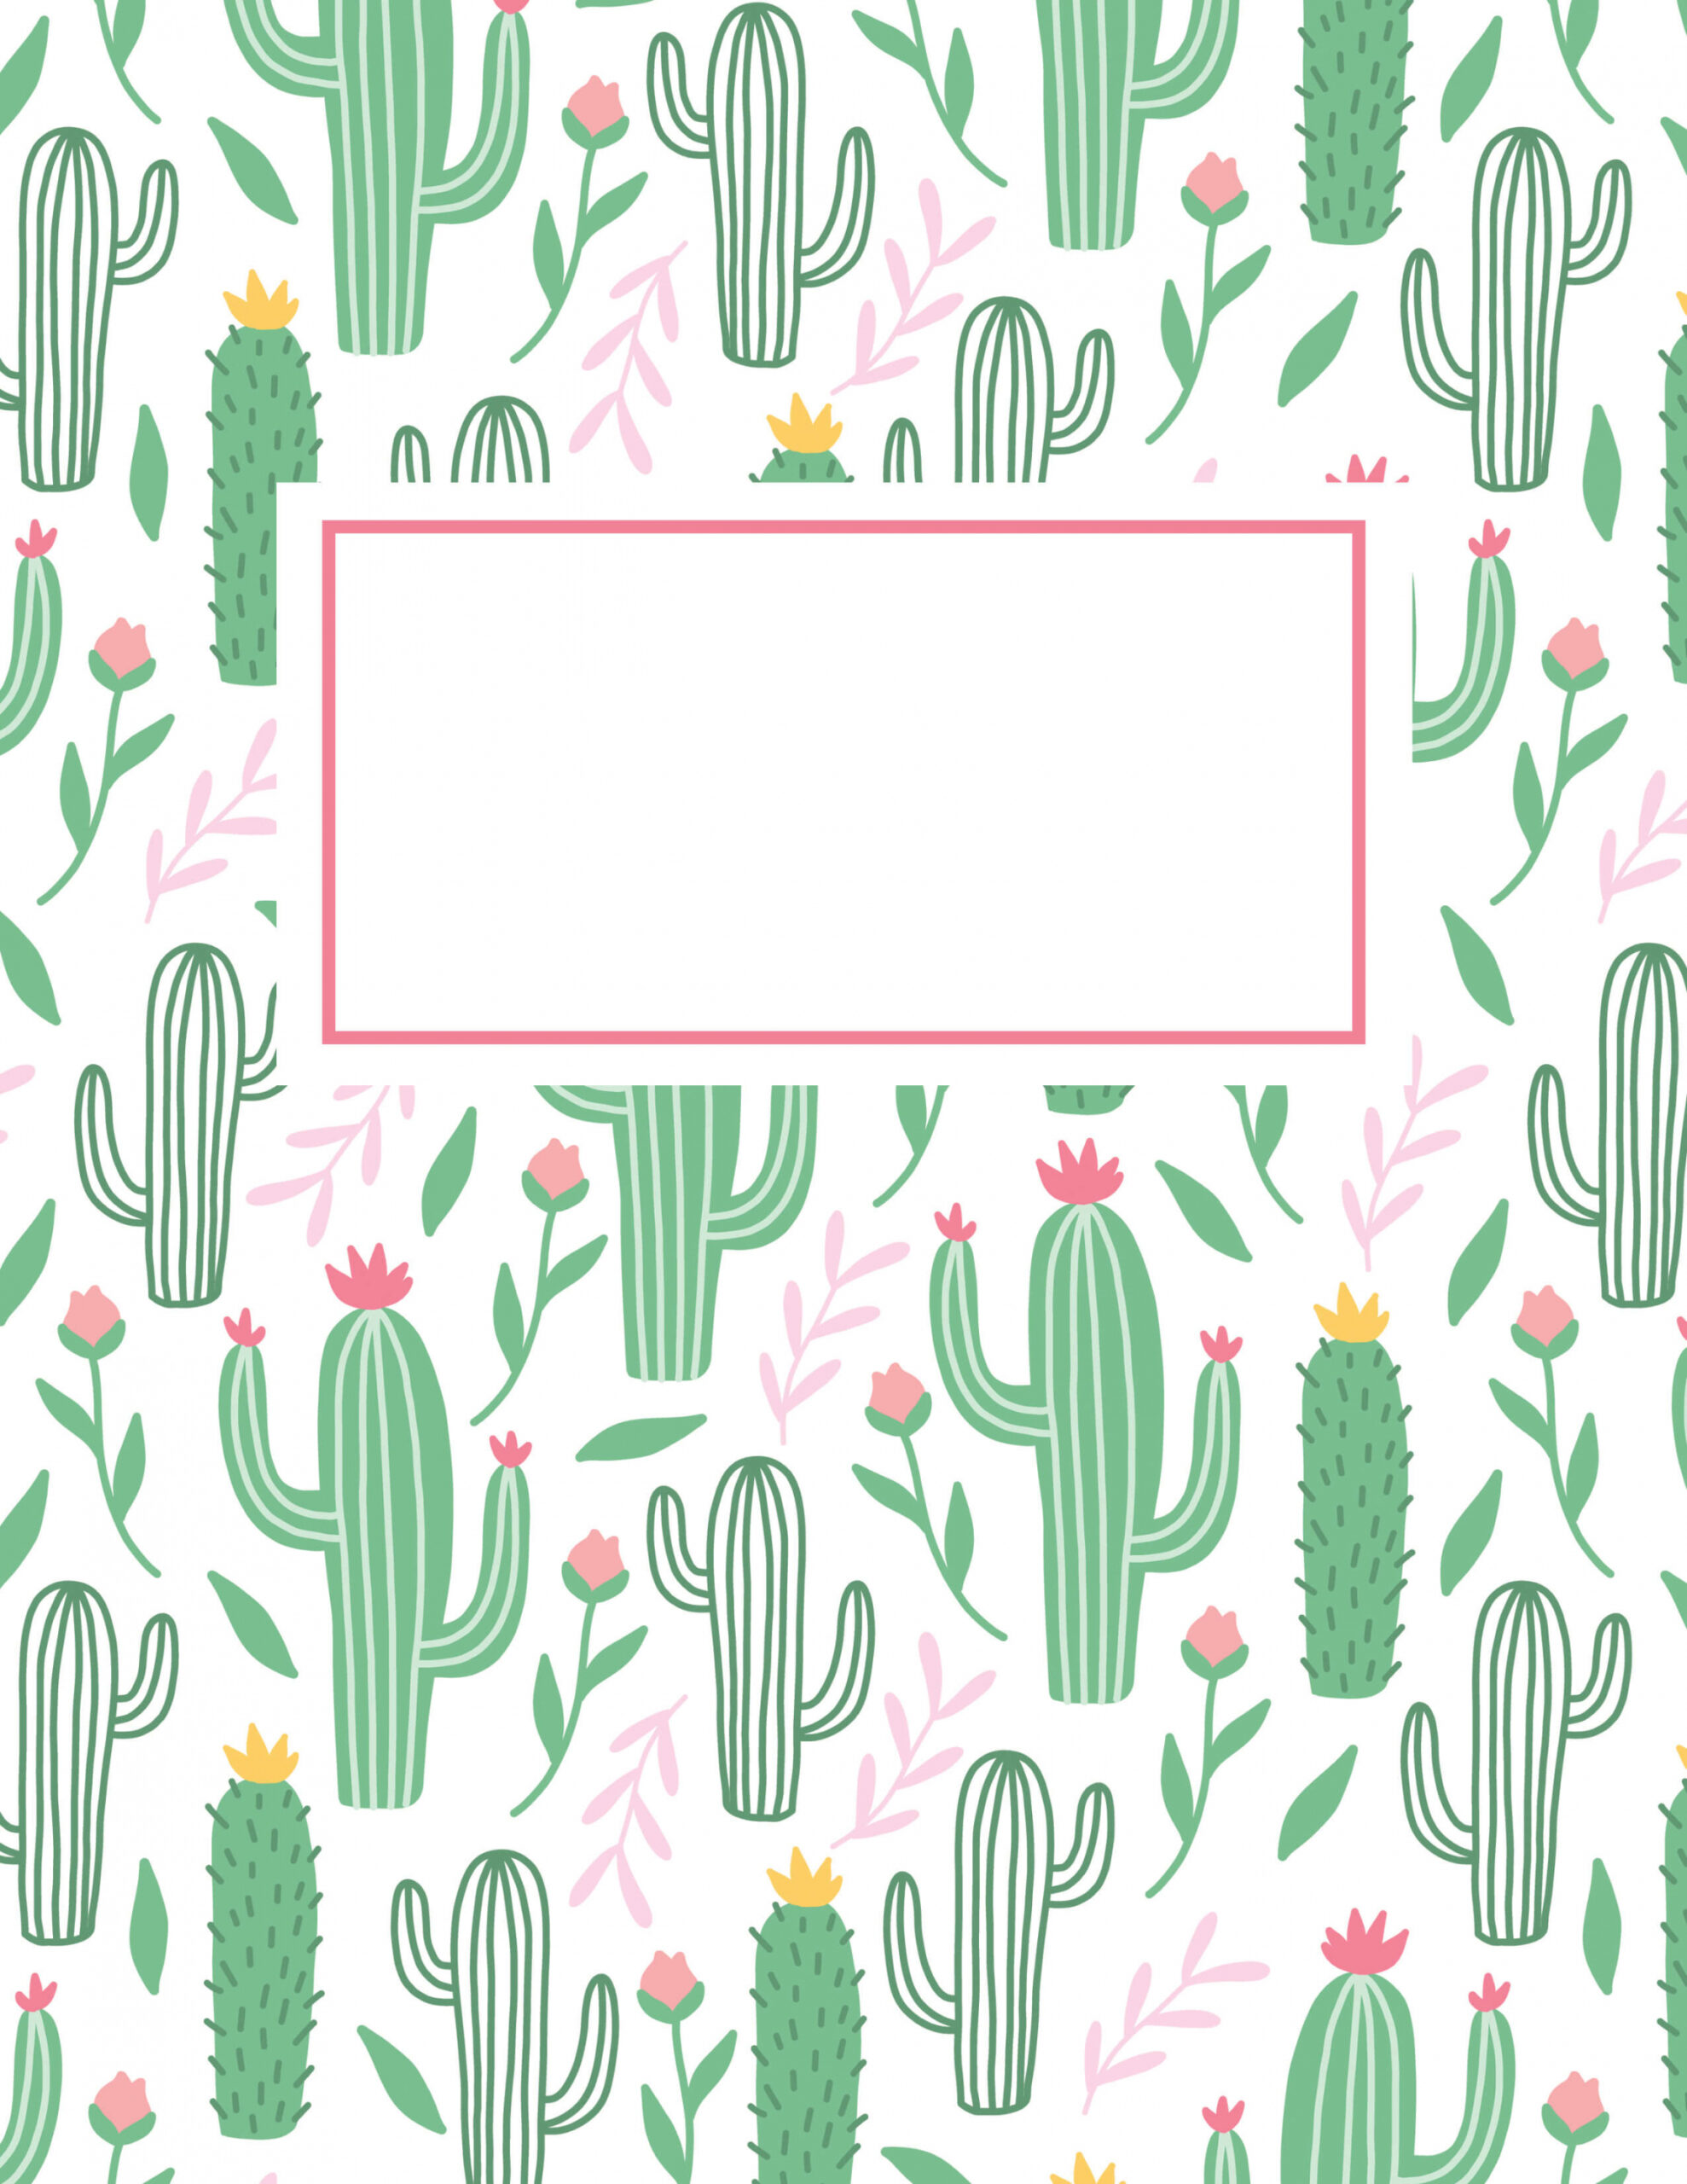 Cactus Printable Binder Cover - Chicfetti - FREE Printables - Free Printable Binder Covers